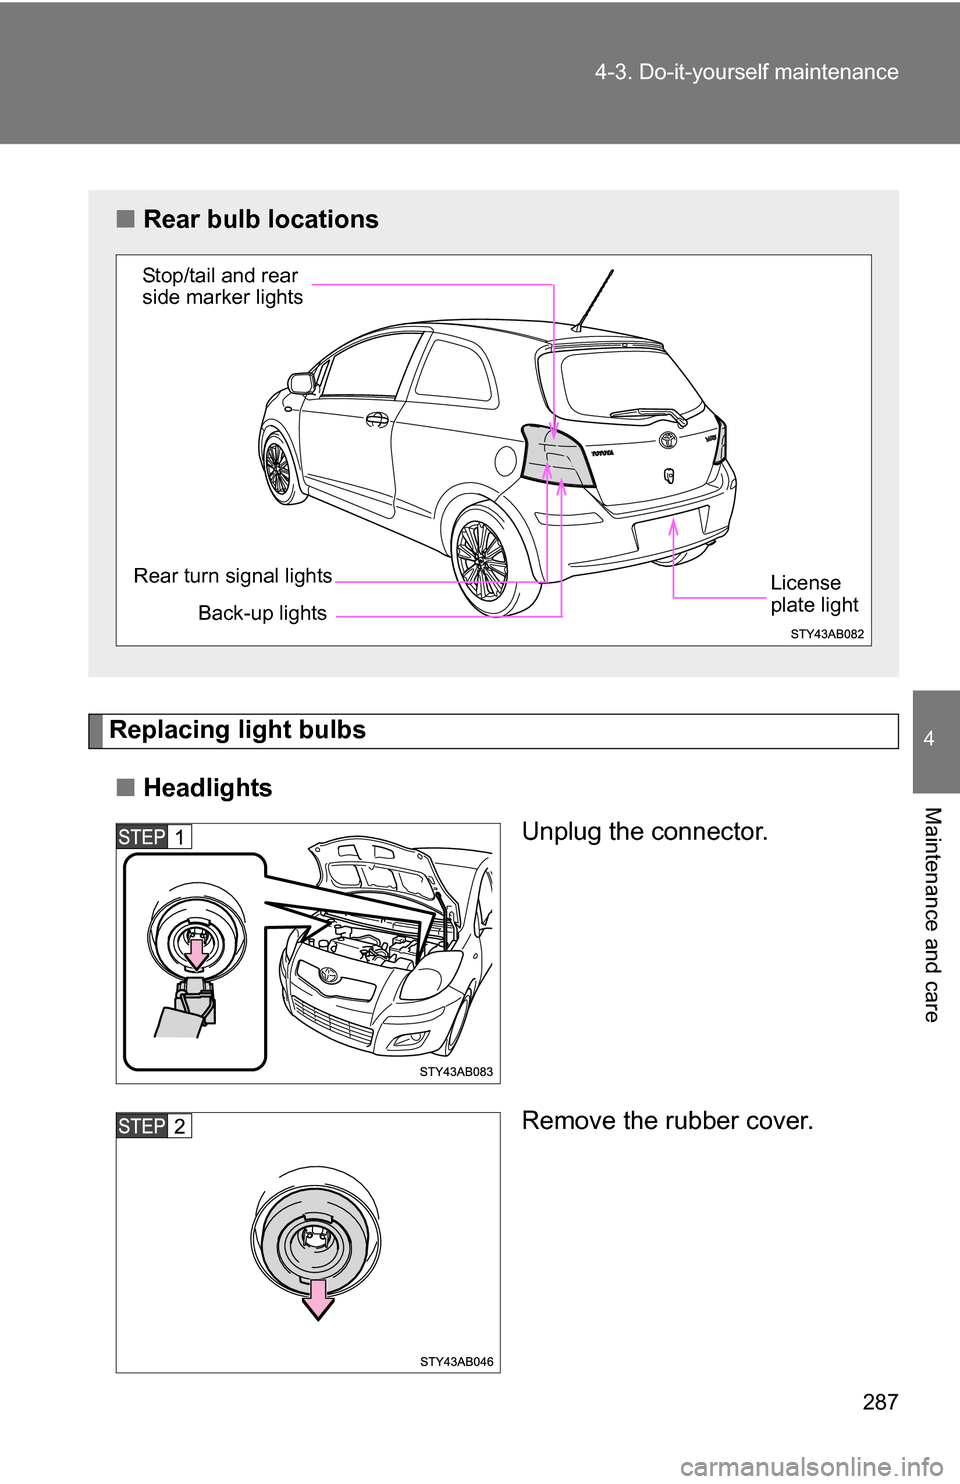 TOYOTA YARIS 2009 2.G Owners Manual 287
4-3. Do-it-yourself maintenance
4
Maintenance and care
Replacing light bulbs
■ Headlights
Unplug the connector.
Remove the rubber cover.
■Rear bulb locations
Back-up lights
Rear turn signal li